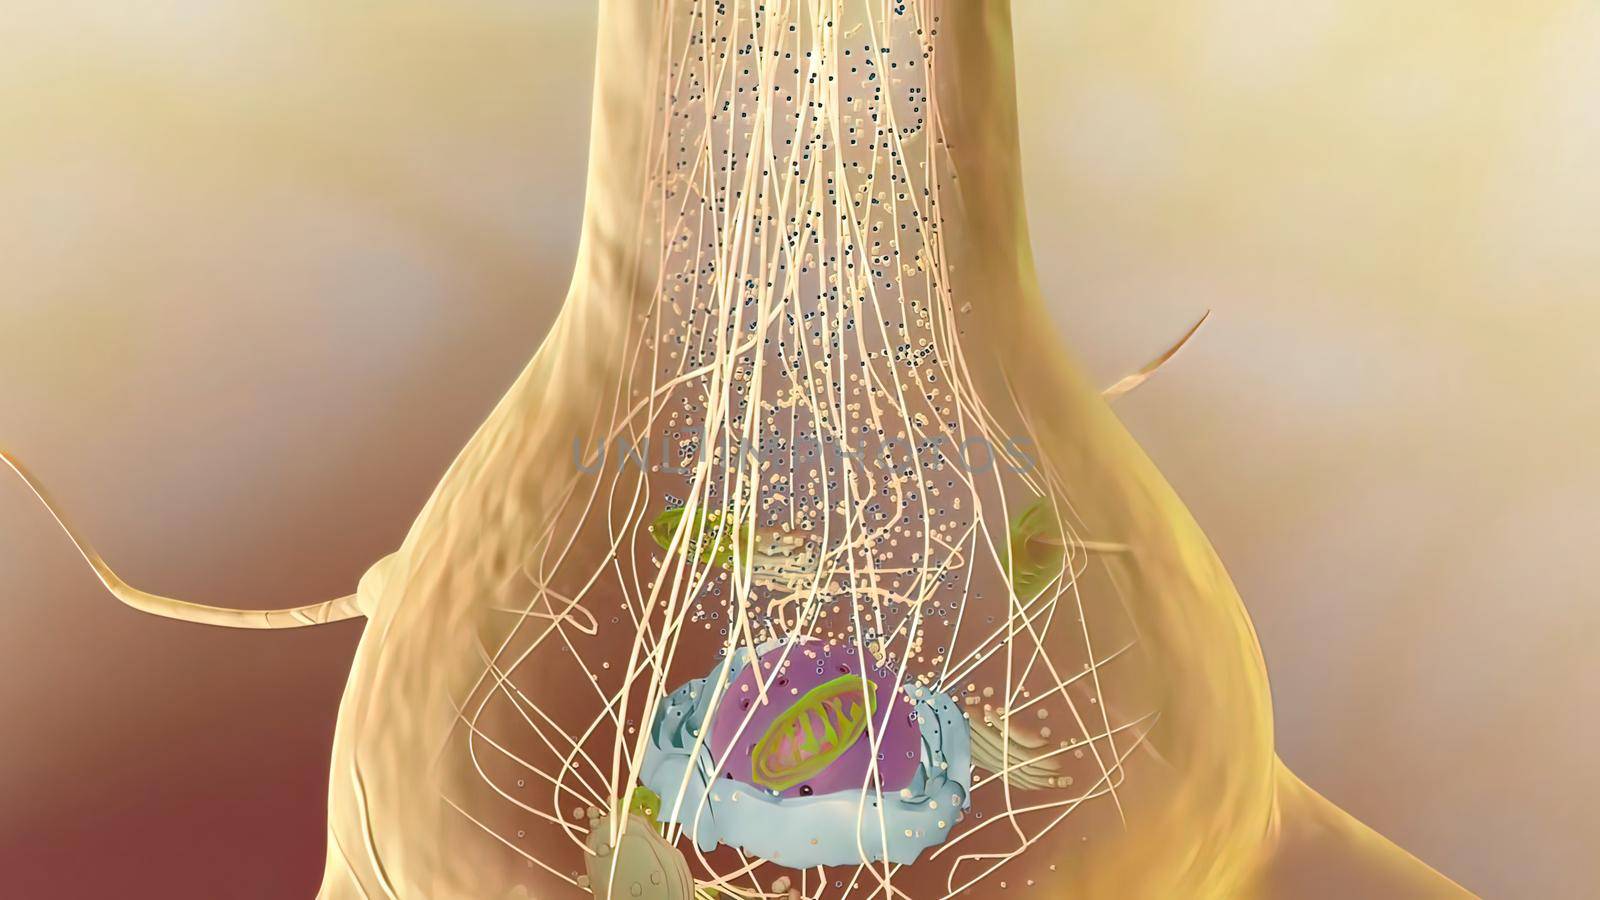 Neurofibrillary tangles are abnormal accumulations of a protein called tau that collect inside neurons 3d medical illustration.